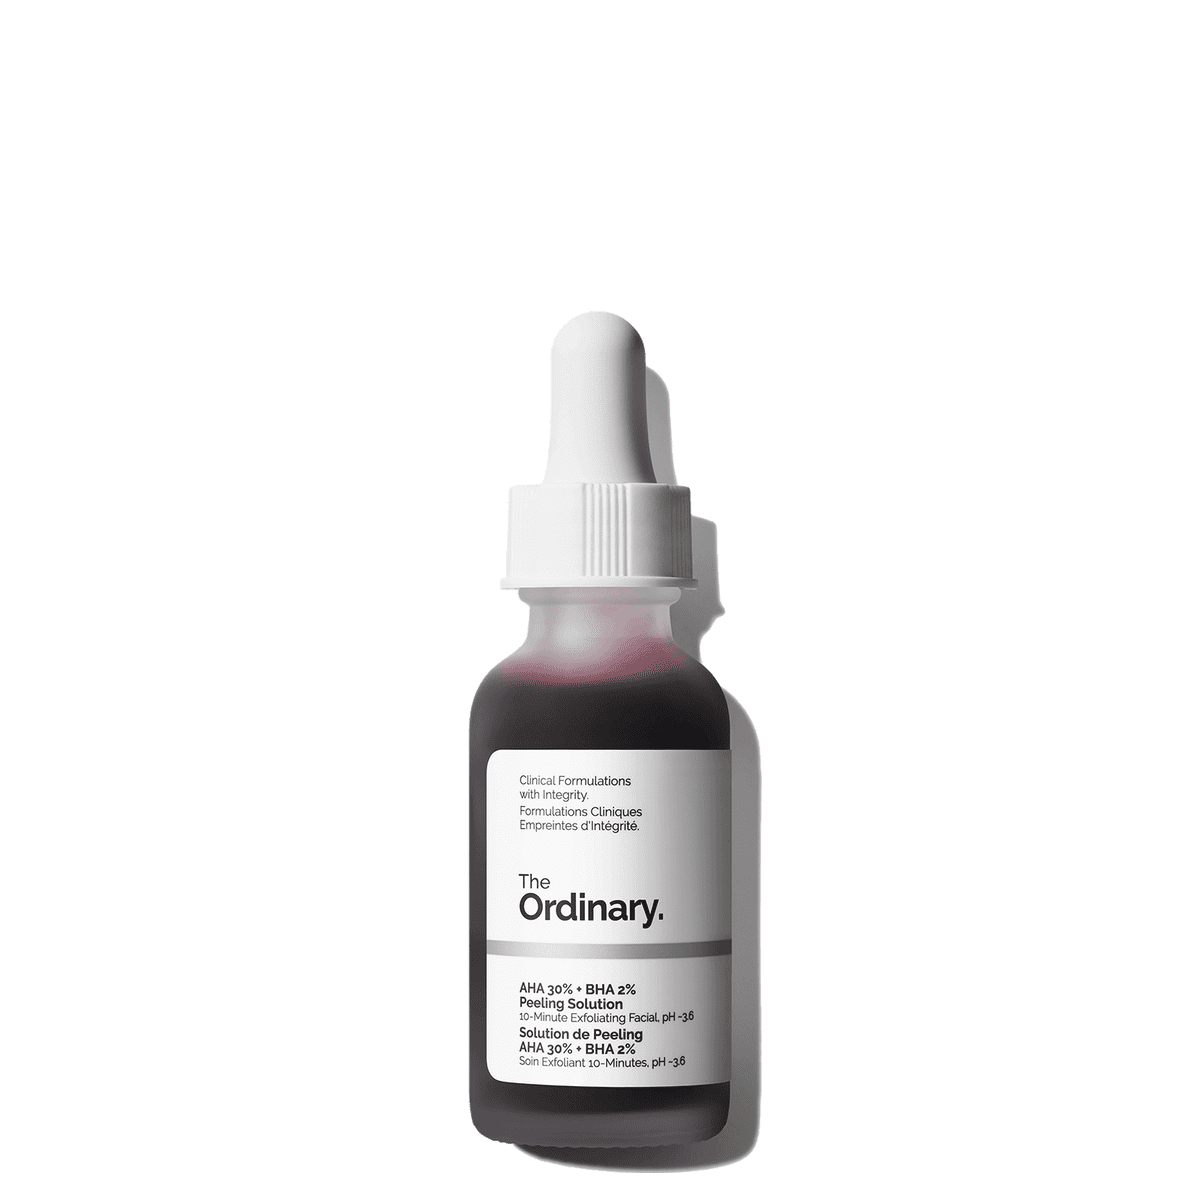 Revitalize skin with The Ordinary AHA 30% + BHA 2% Peeling Solution 30ml. Gently exfoliates, unclogs pores, and improves skin texture. Targets acne, boosts radiance, and reveals a smoother, brighter complexion